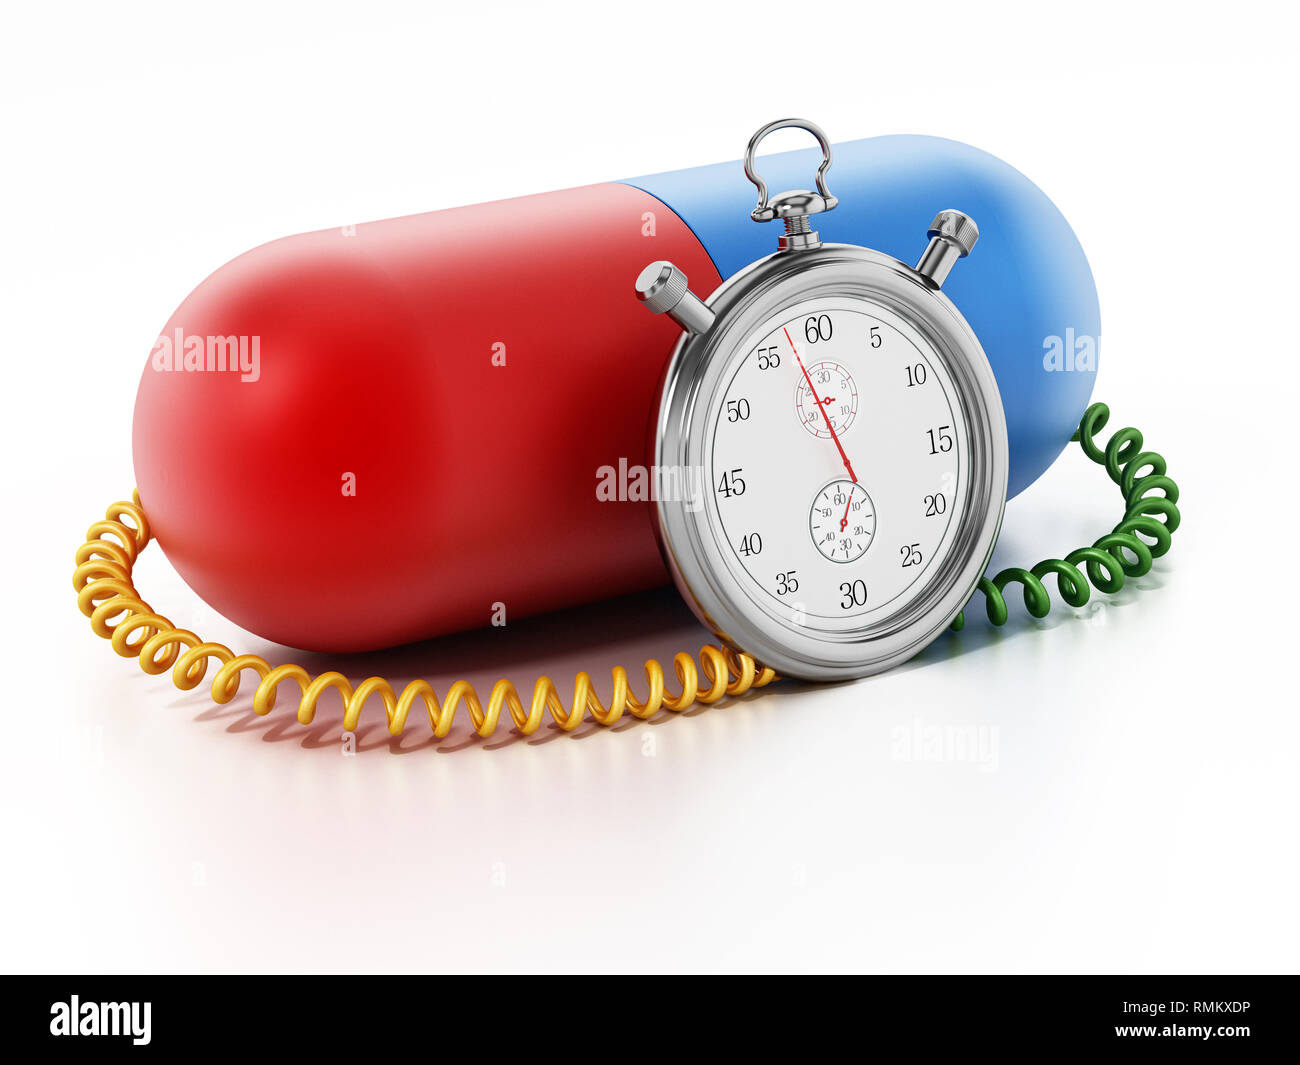 Chronometer attached to red and blue capsule pill. 3D illustration. Stock Photo